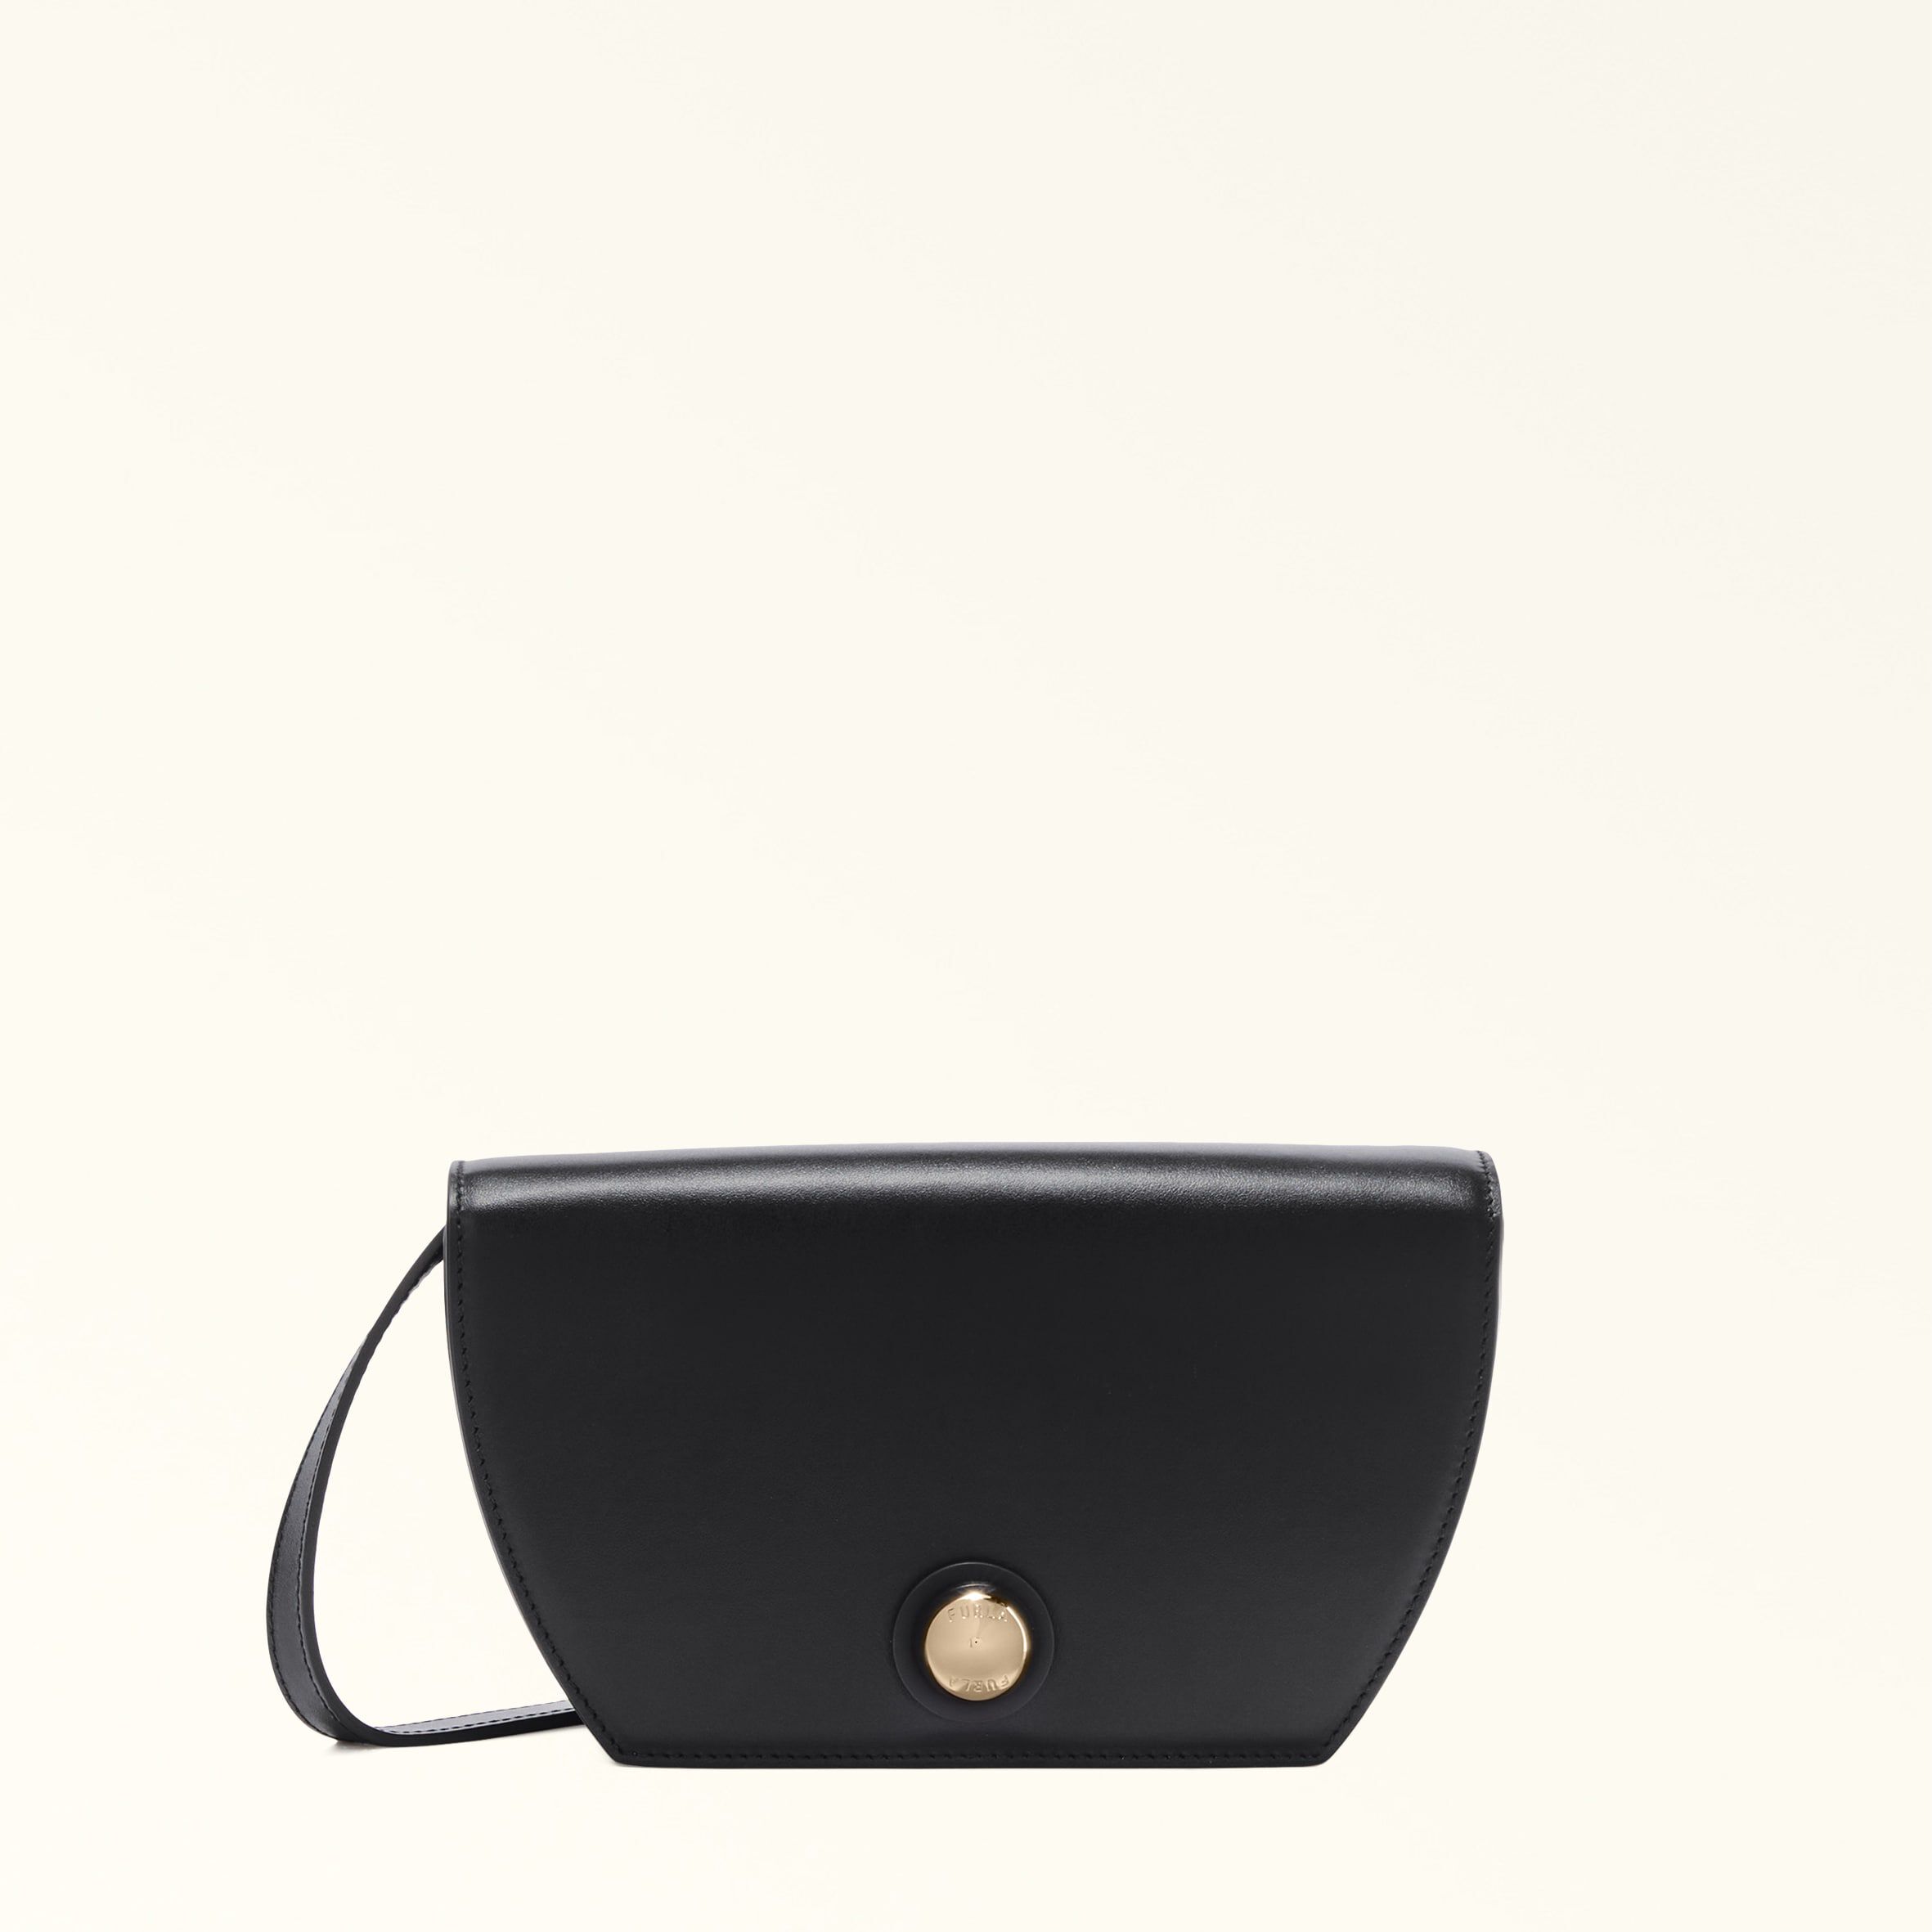 New arrivals: bags, wallets and accessories | Furla